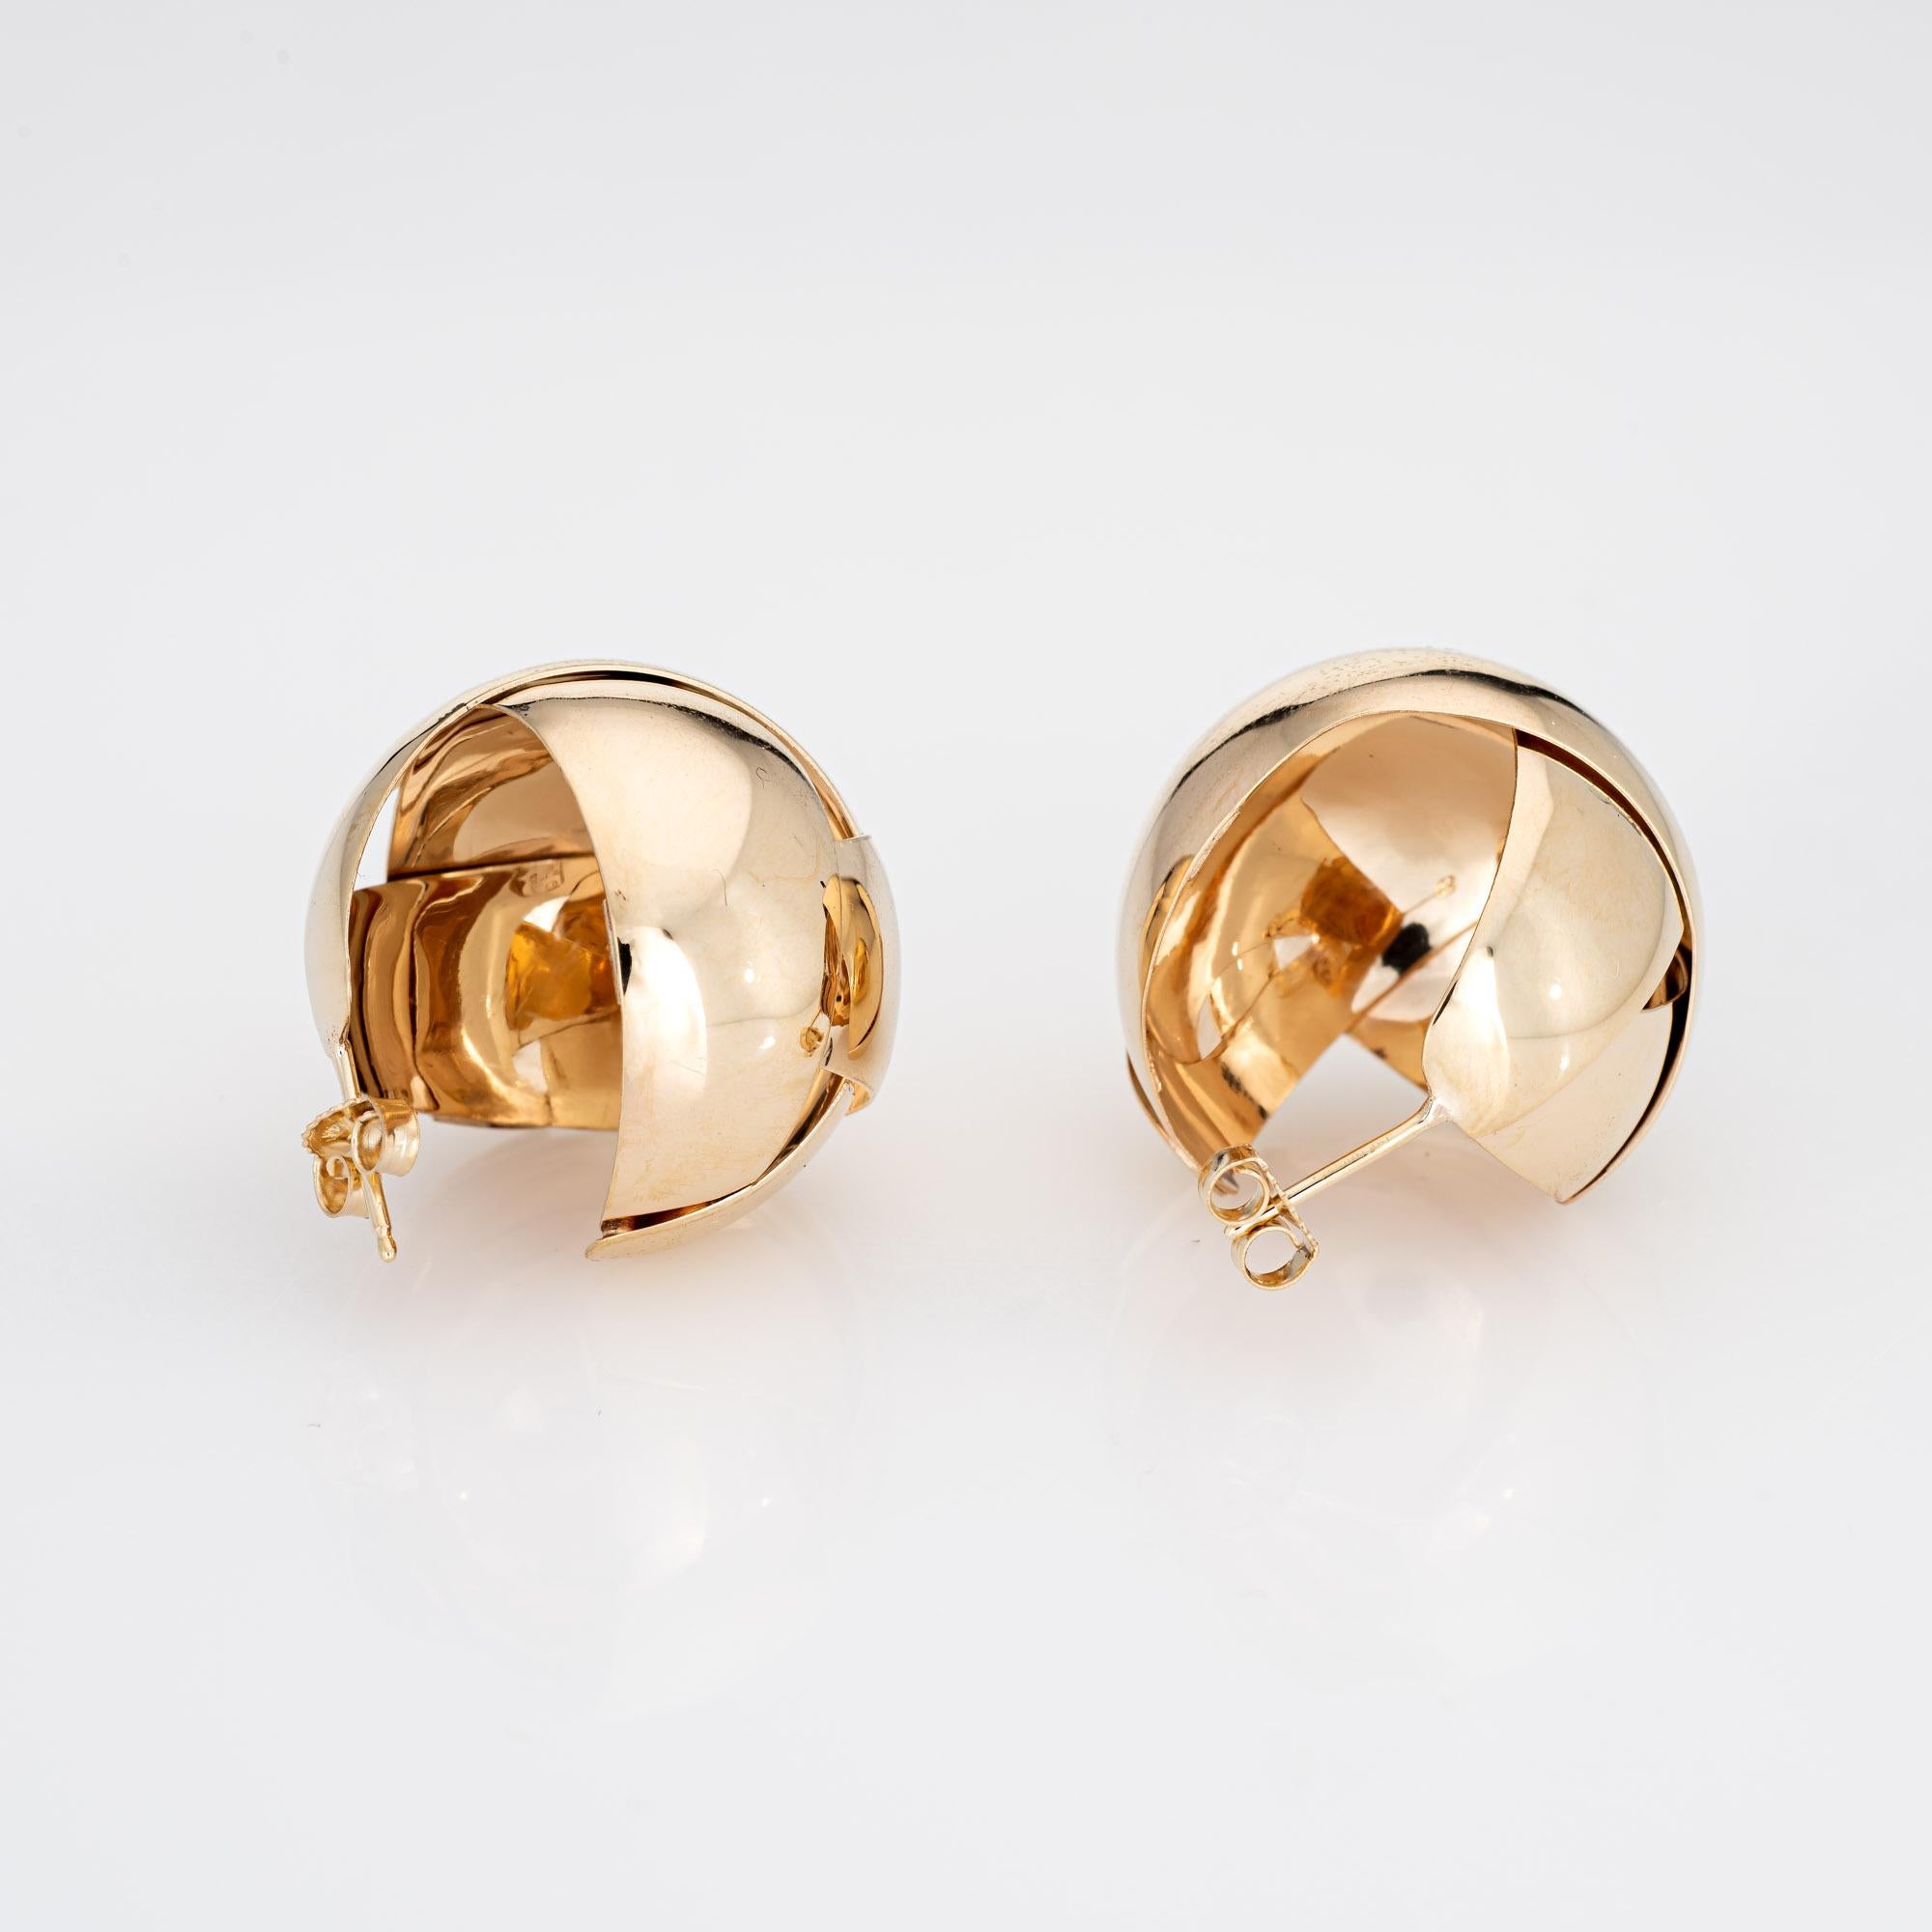 Elegant pair of vintage braided large round orb earrings (circa 1980s to 1990s) crafted in 14k yellow gold. 

The elegant earrings are crafted in a large round braided design (0.90 inches) and make a great statement on the earlobe. Ideal for day or